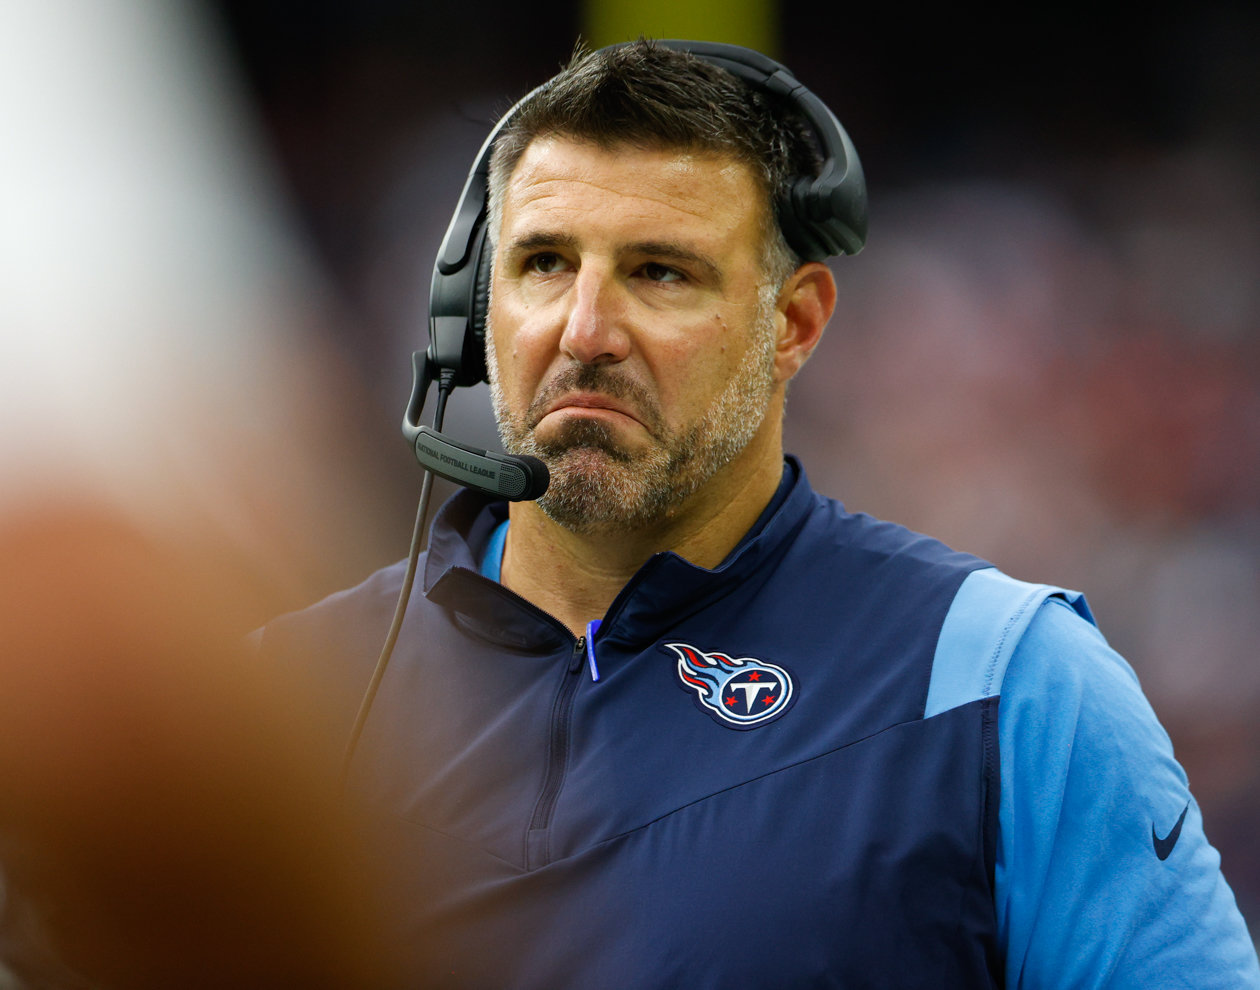 Titans head coach Mike Vrabel during an NFL game between the Texans and the Titans on Oct. 30, 2022 in Houston.